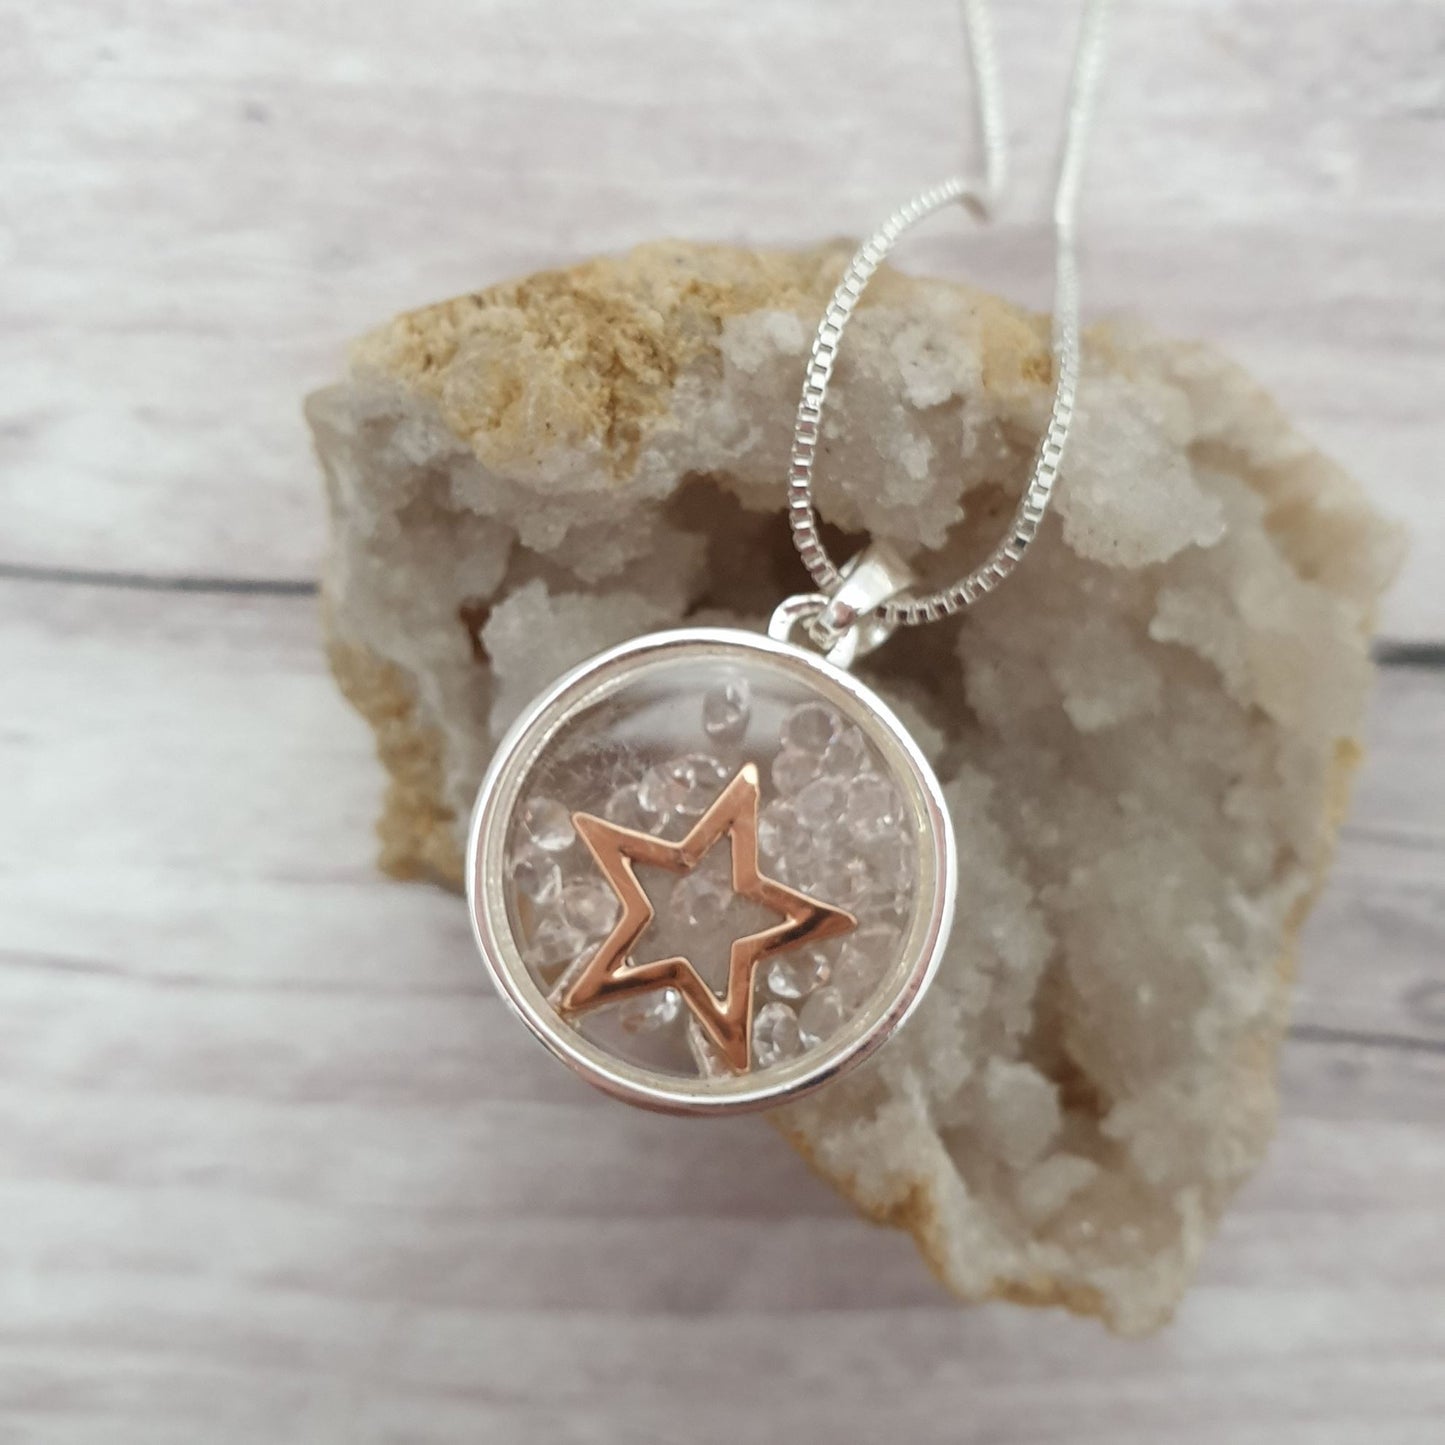 Photo of a Silver circular pendant decorated with a Rose Gold Star and diamante Crystals